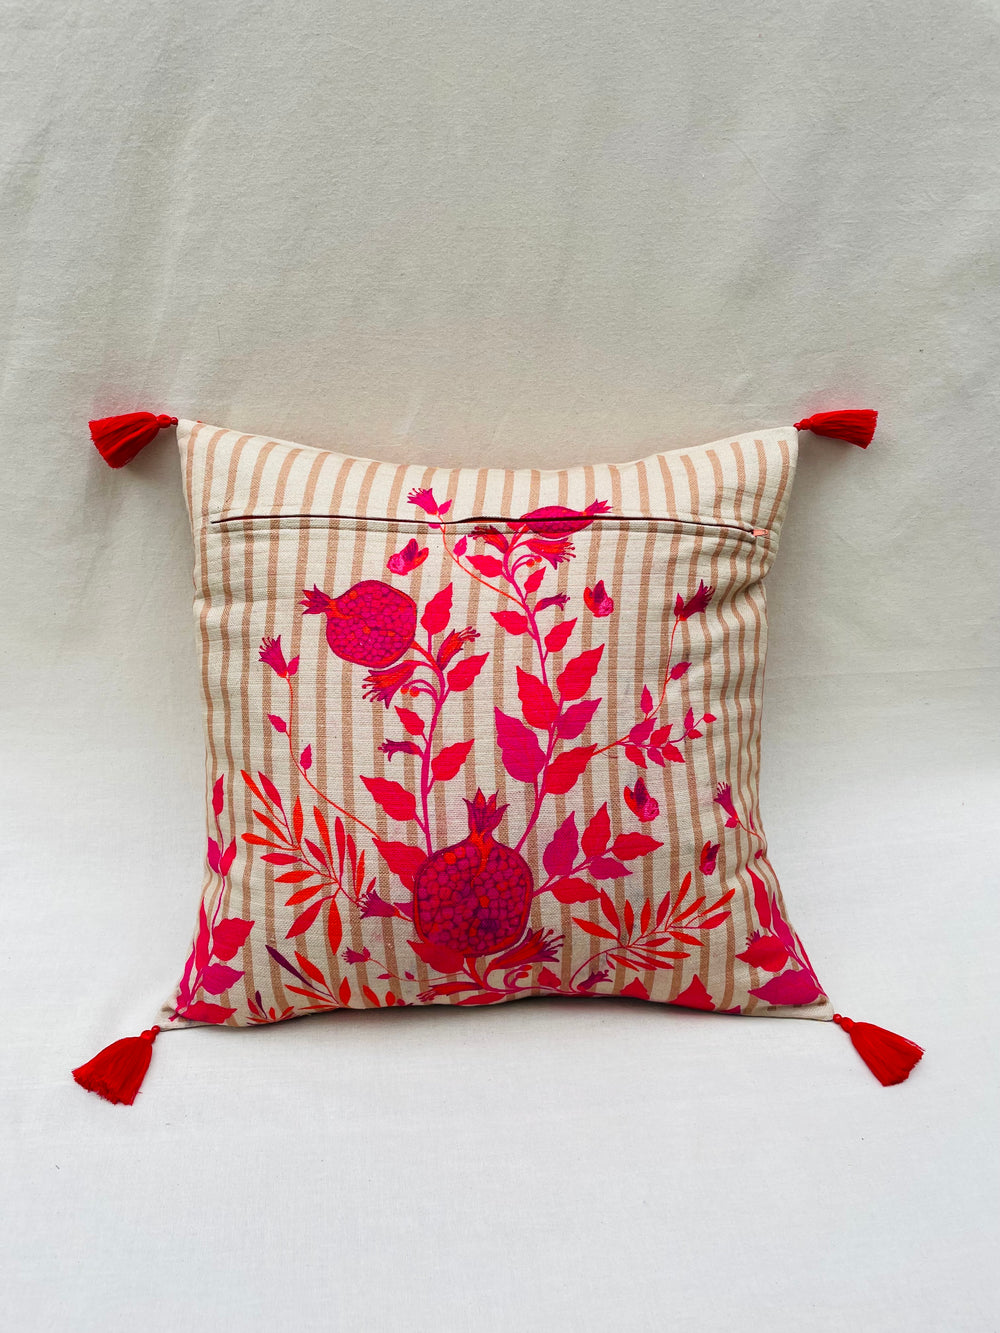 Hand-Beaded Pomegranate Stripe Throw Pillow Cover